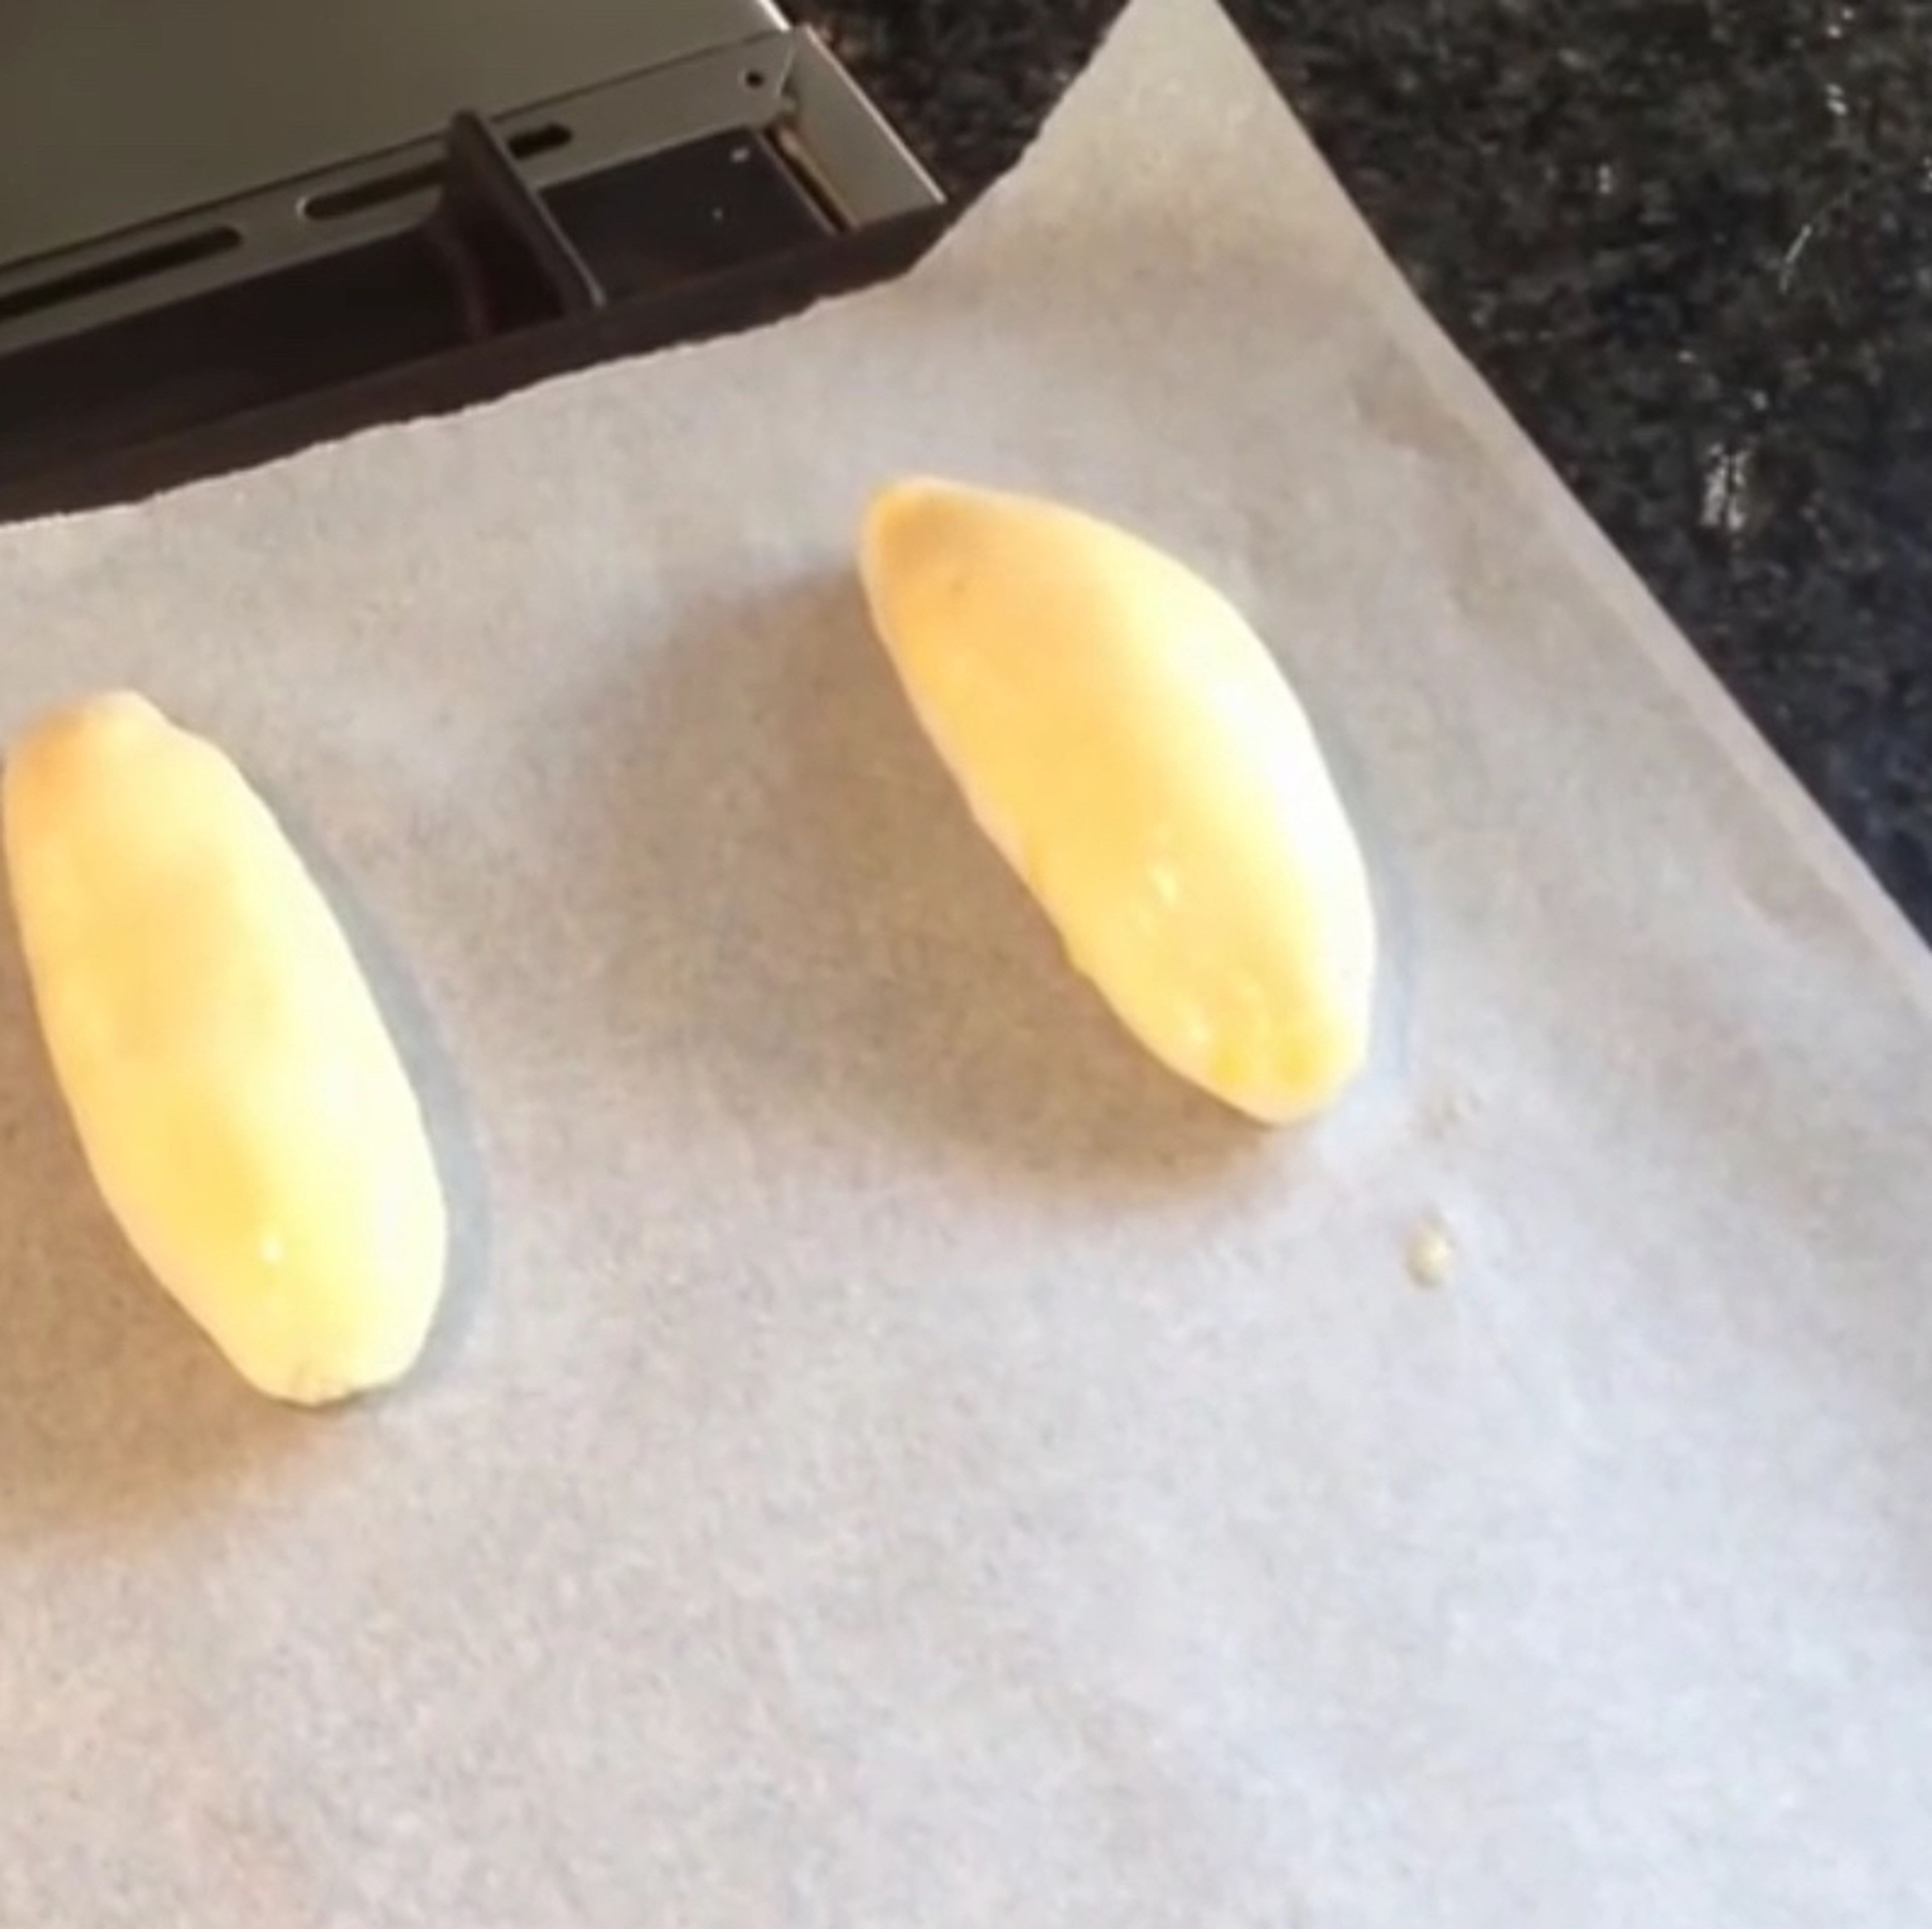 Softly roll the dough balls again then roll them into a longer shape. Place them on an oven tray on some baking paper. (Leave room for them to grow slightly)